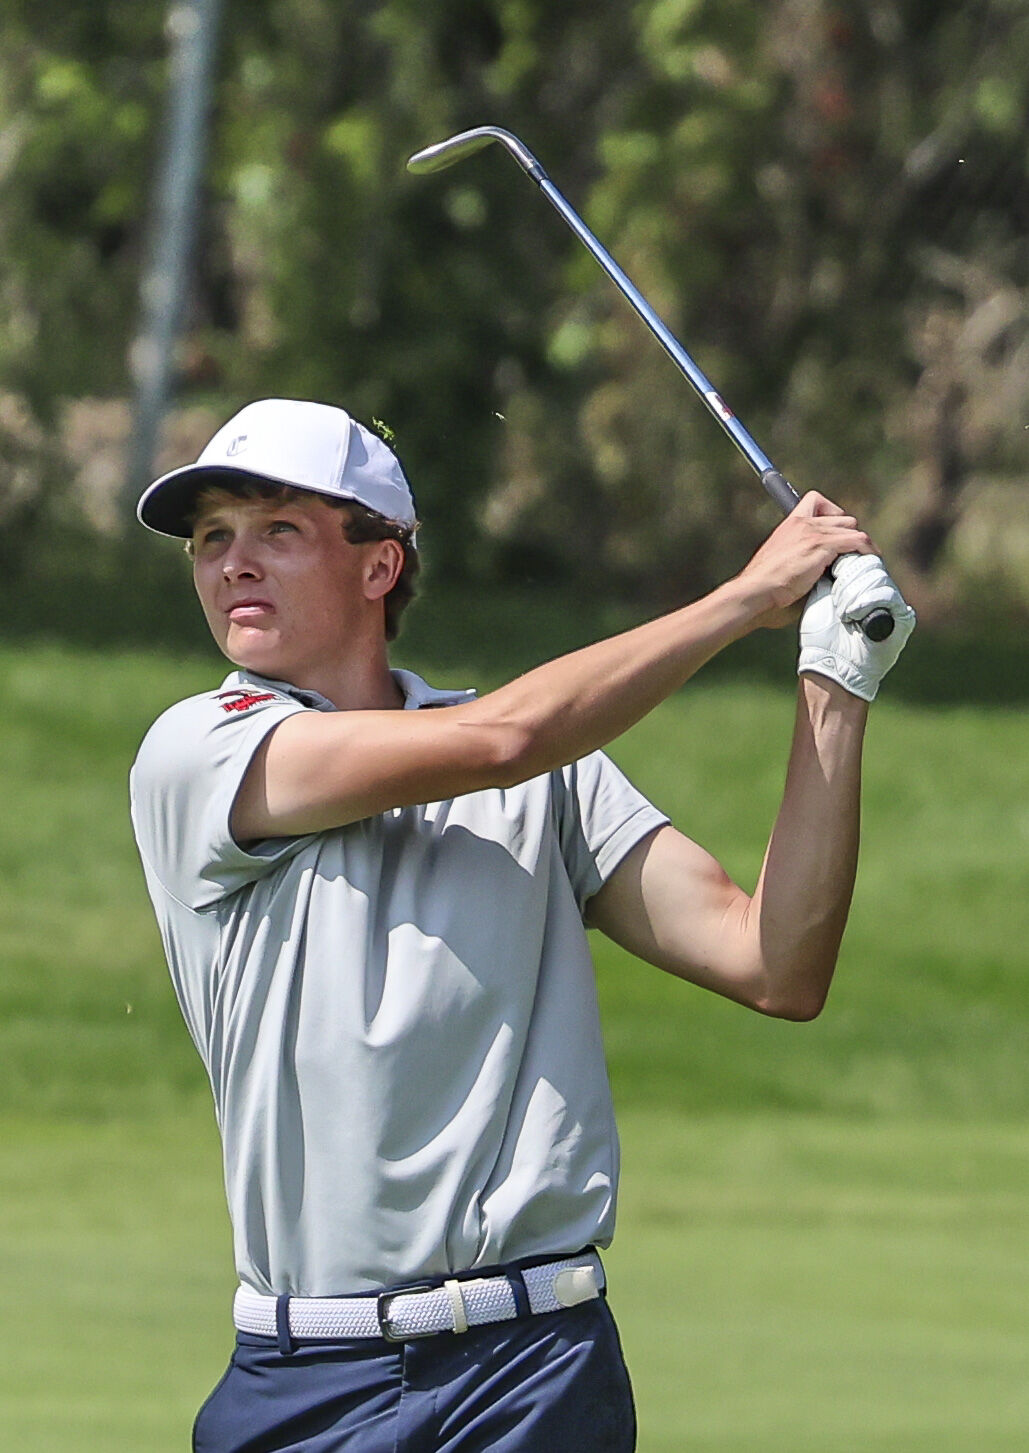 McClear finishes strong for 2nd straight State Amateur title